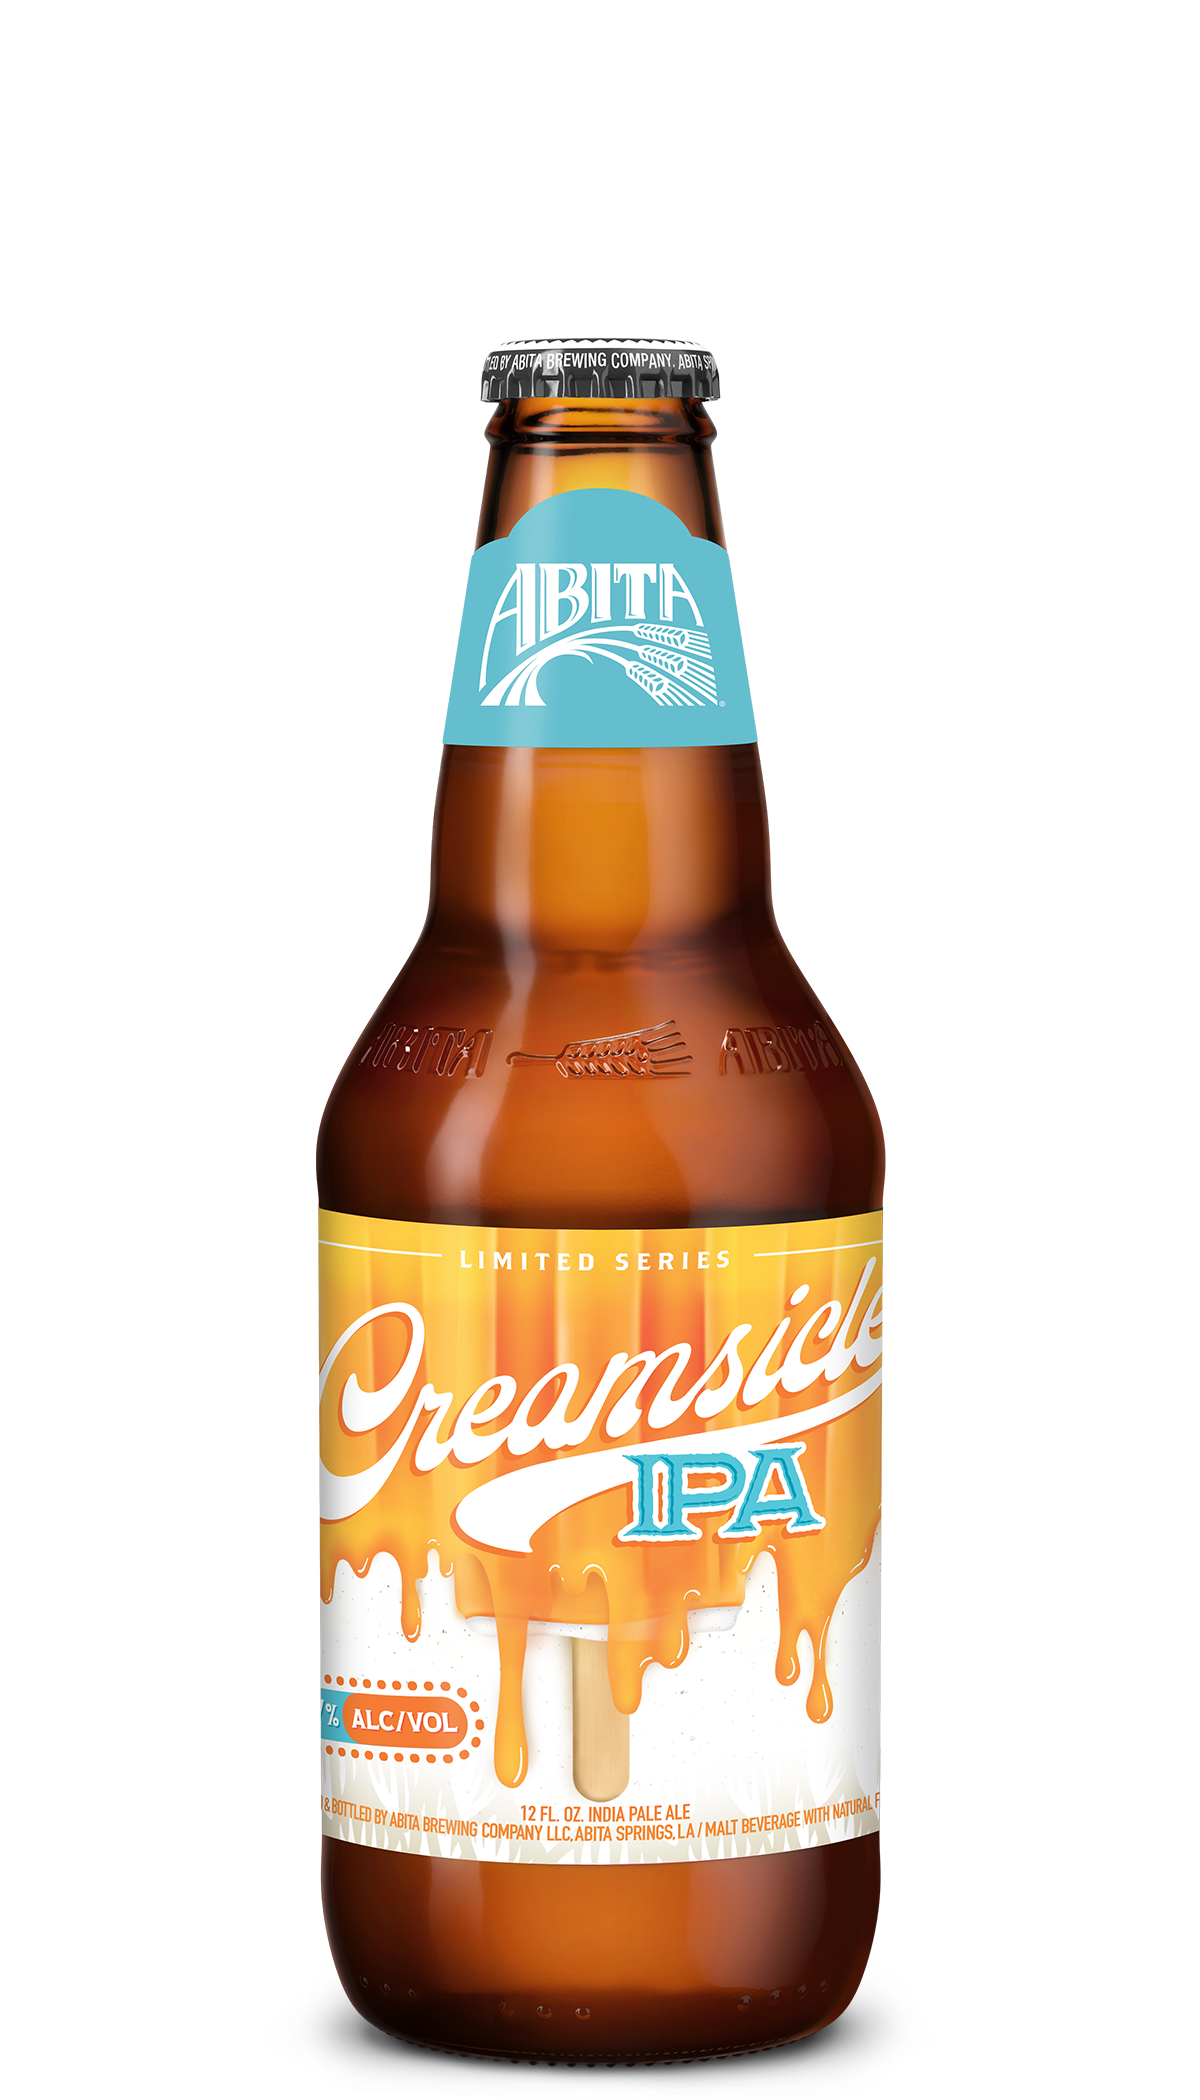 single bottle of creamsicle ipa from abita brewing company